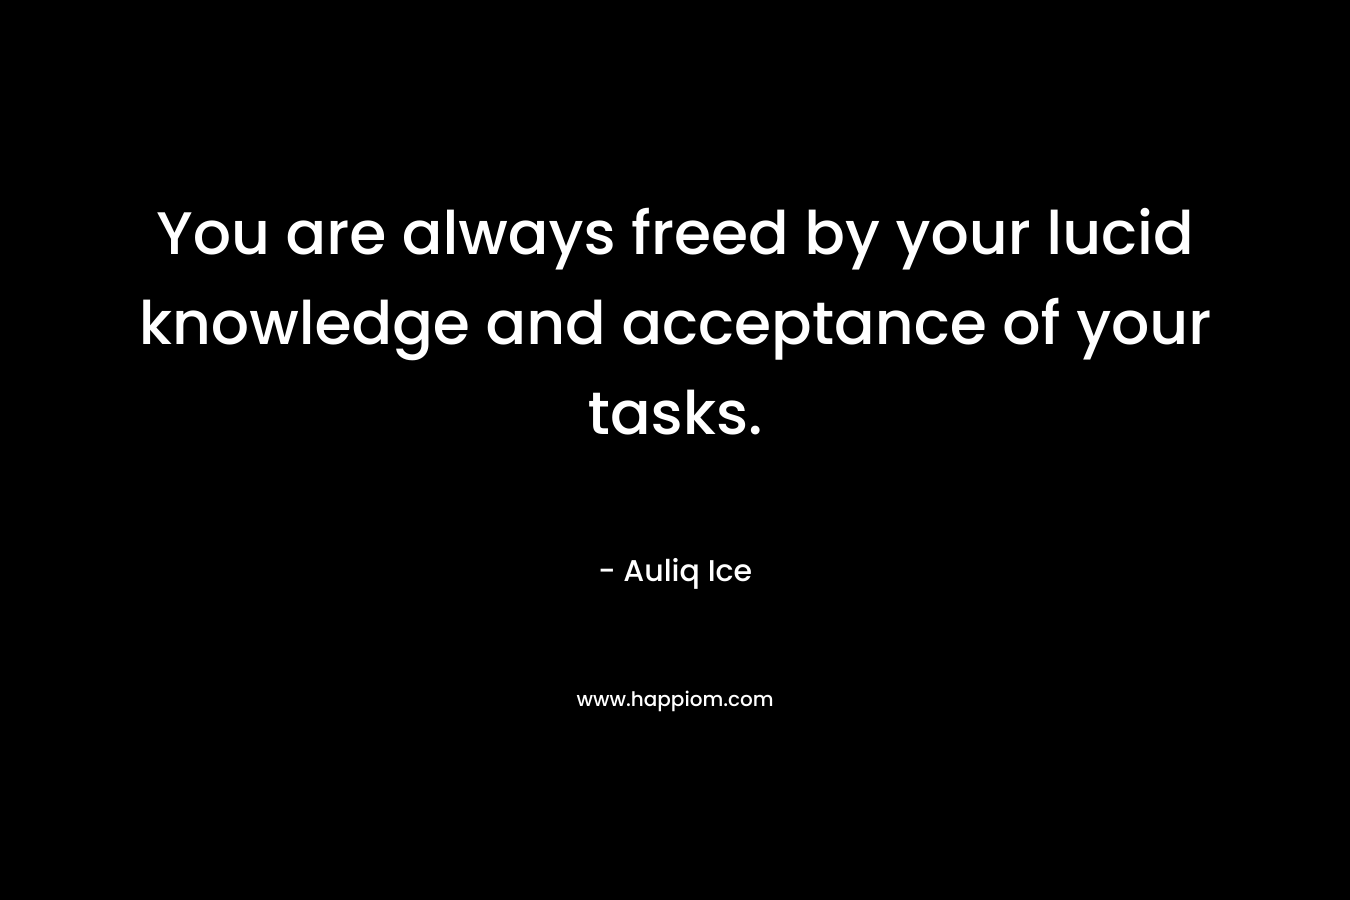 You are always freed by your lucid knowledge and acceptance of your tasks.